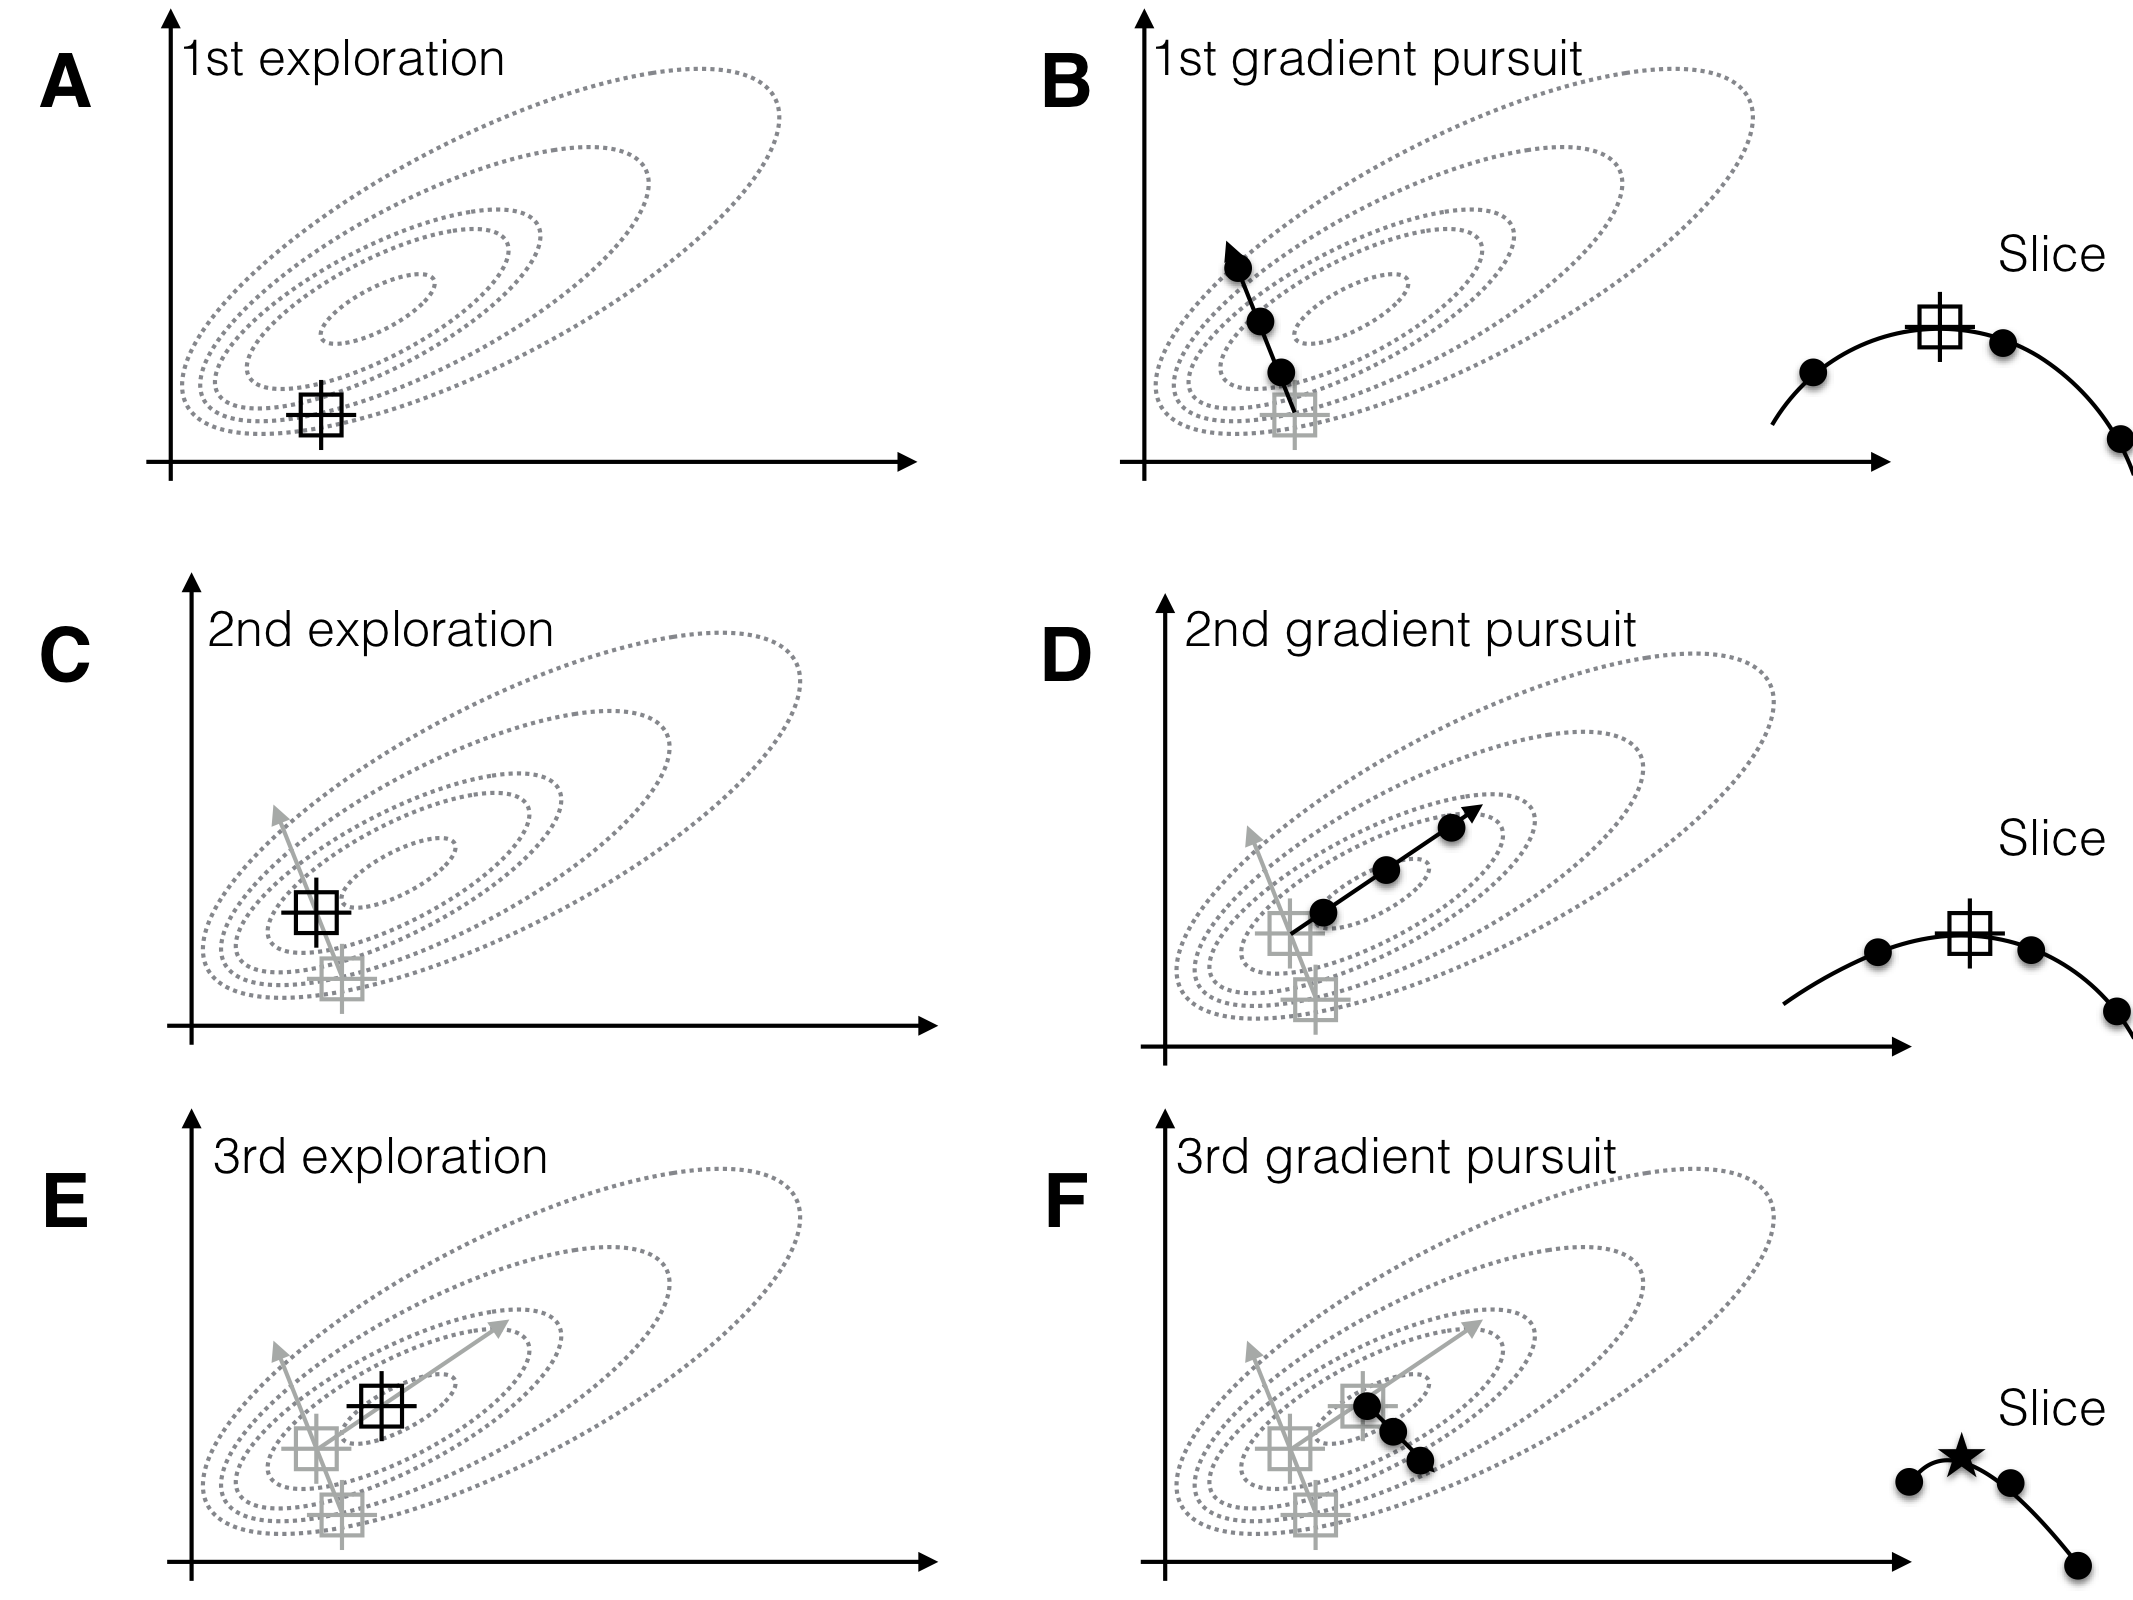 Sequential experiments to determine optimum conditions. Three exploration experiments (A,C,E), each followed by a gradient pursuit (B,D,F). Dotted lines: contours of response surface. Black lines and dots: region and points for exploring and gradient pursuit. Inlet curves in panels B,D,F show the slice along the gradient with measured points and resulting maximum.